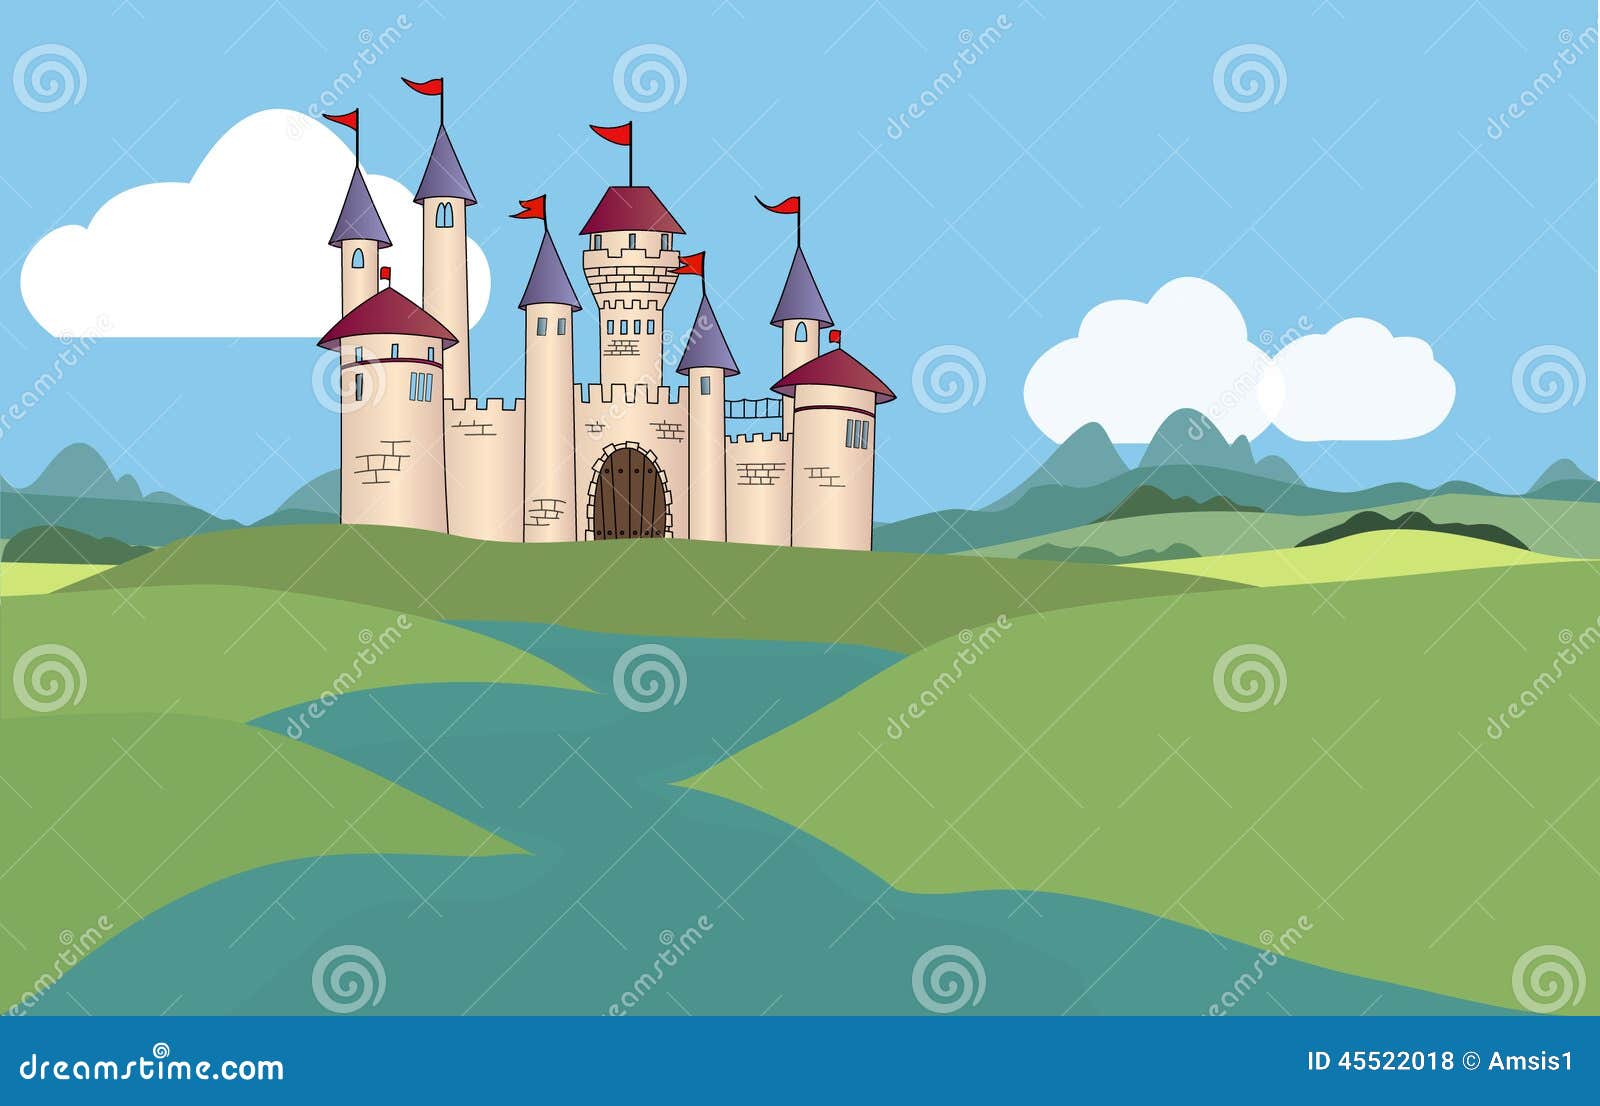 fantasy castle kingdom far away there beautiful hill surrounded moat accessible bridge flags 45522018